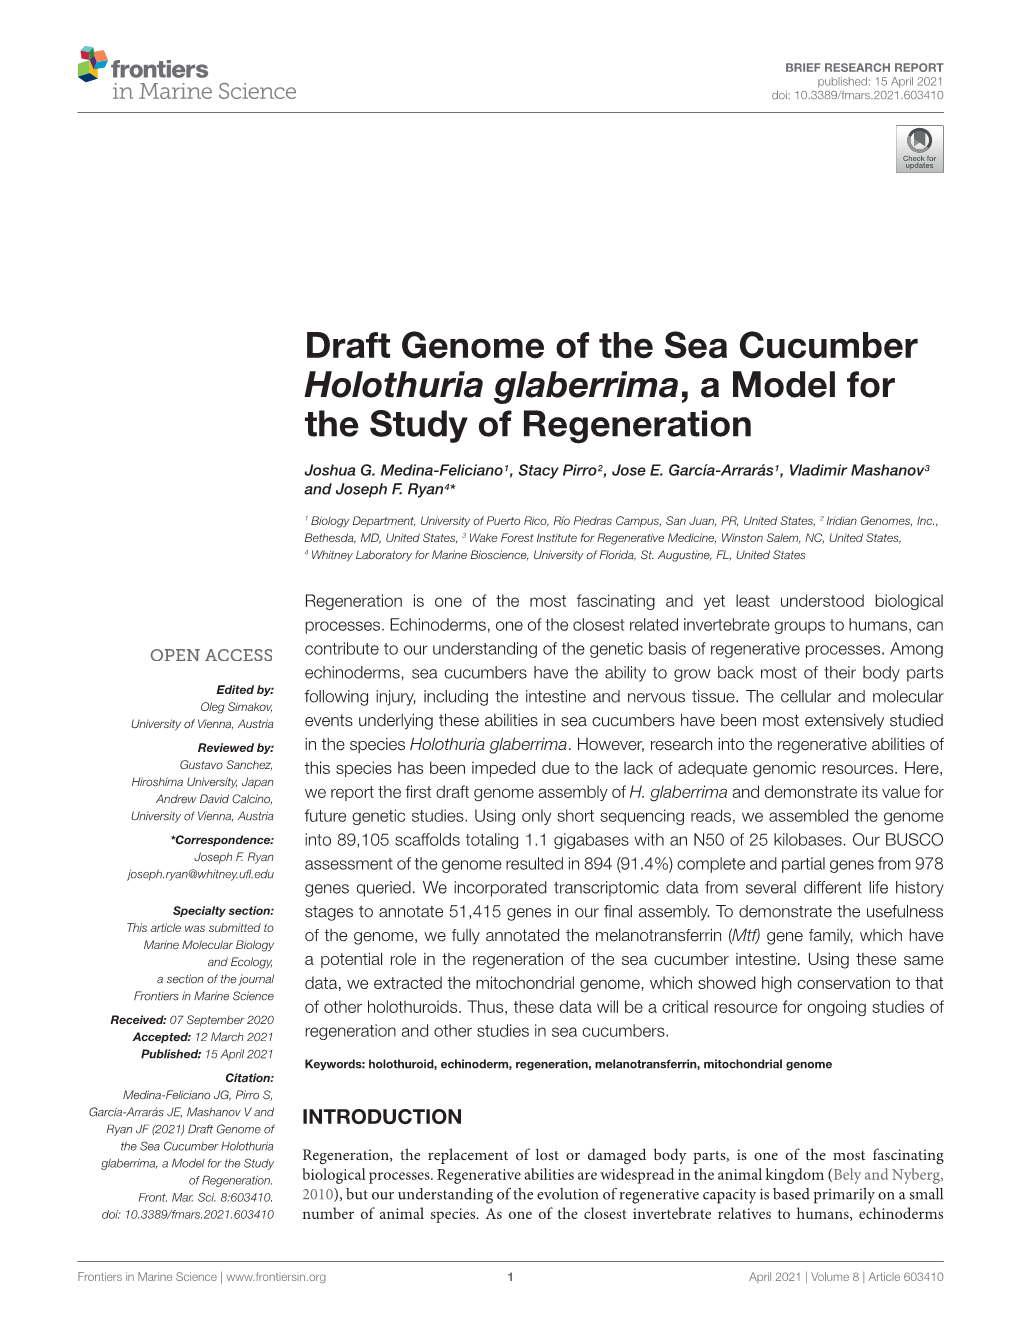 Draft Genome of the Sea Cucumber Holothuria Glaberrima, a Model for the Study of Regeneration